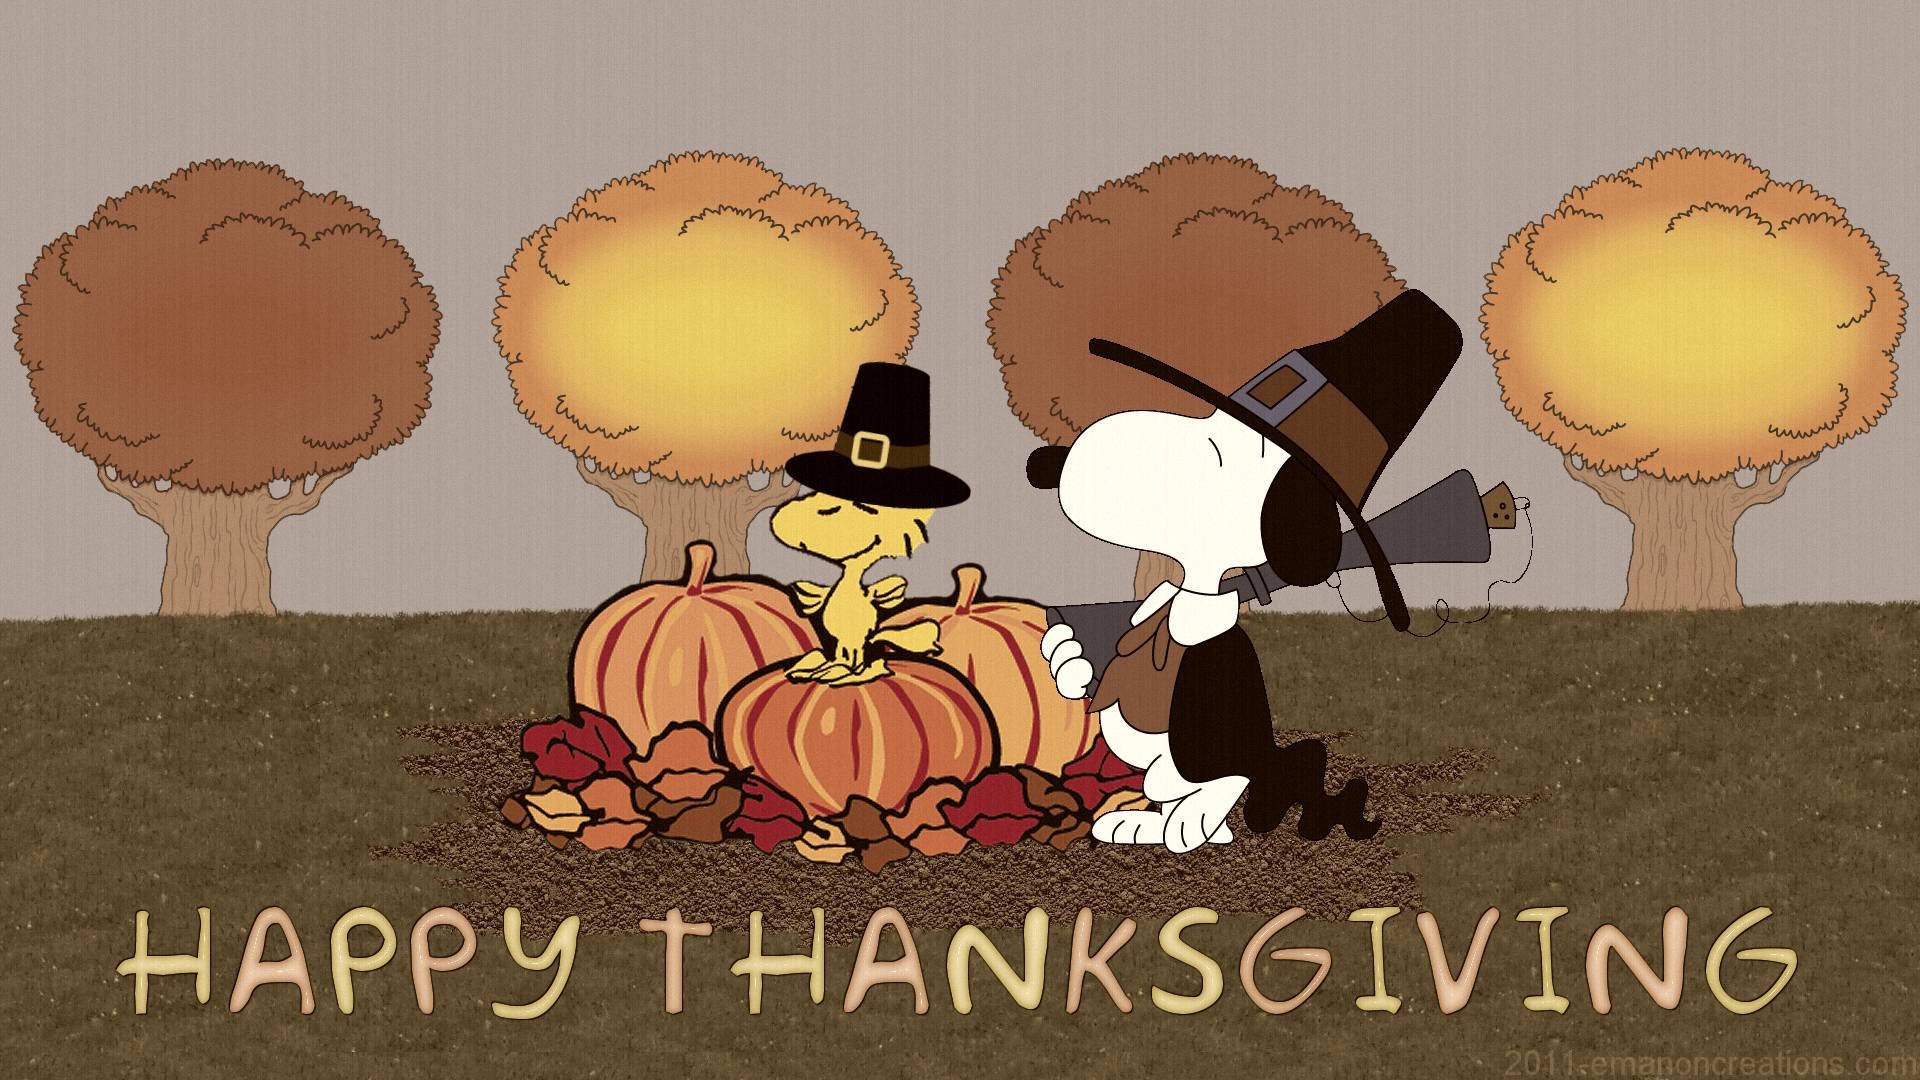 Download Cute Thanksgiving Snoopy Wallpaper